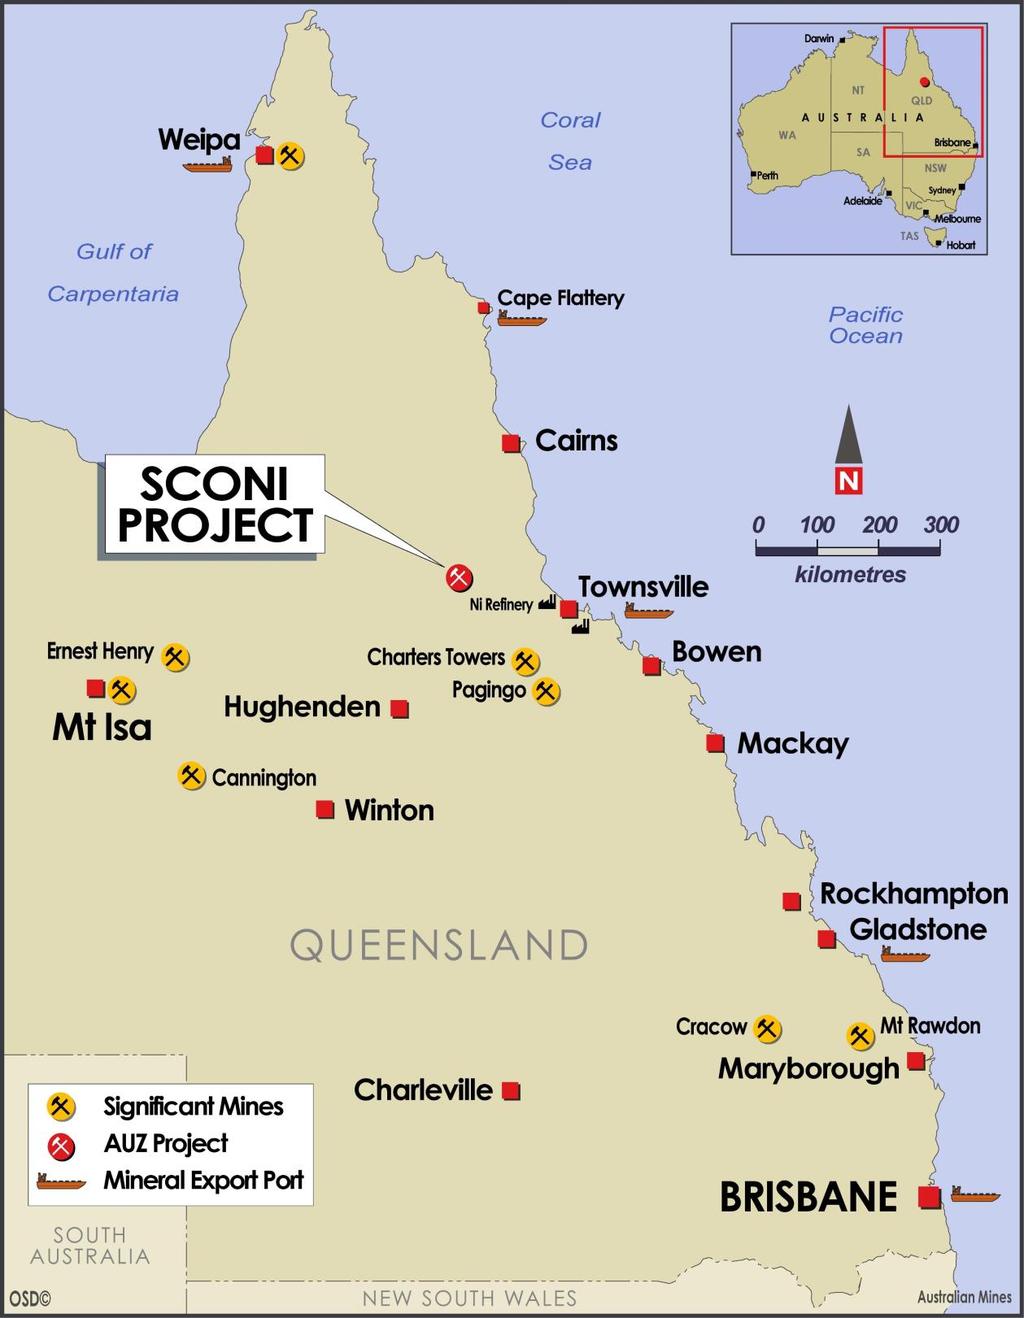 Figure 1: The Sconi Project a joint venture between Australian Mines and Metallica Minerals - is located in North Queensland, approximately 250 kilometres on sealed